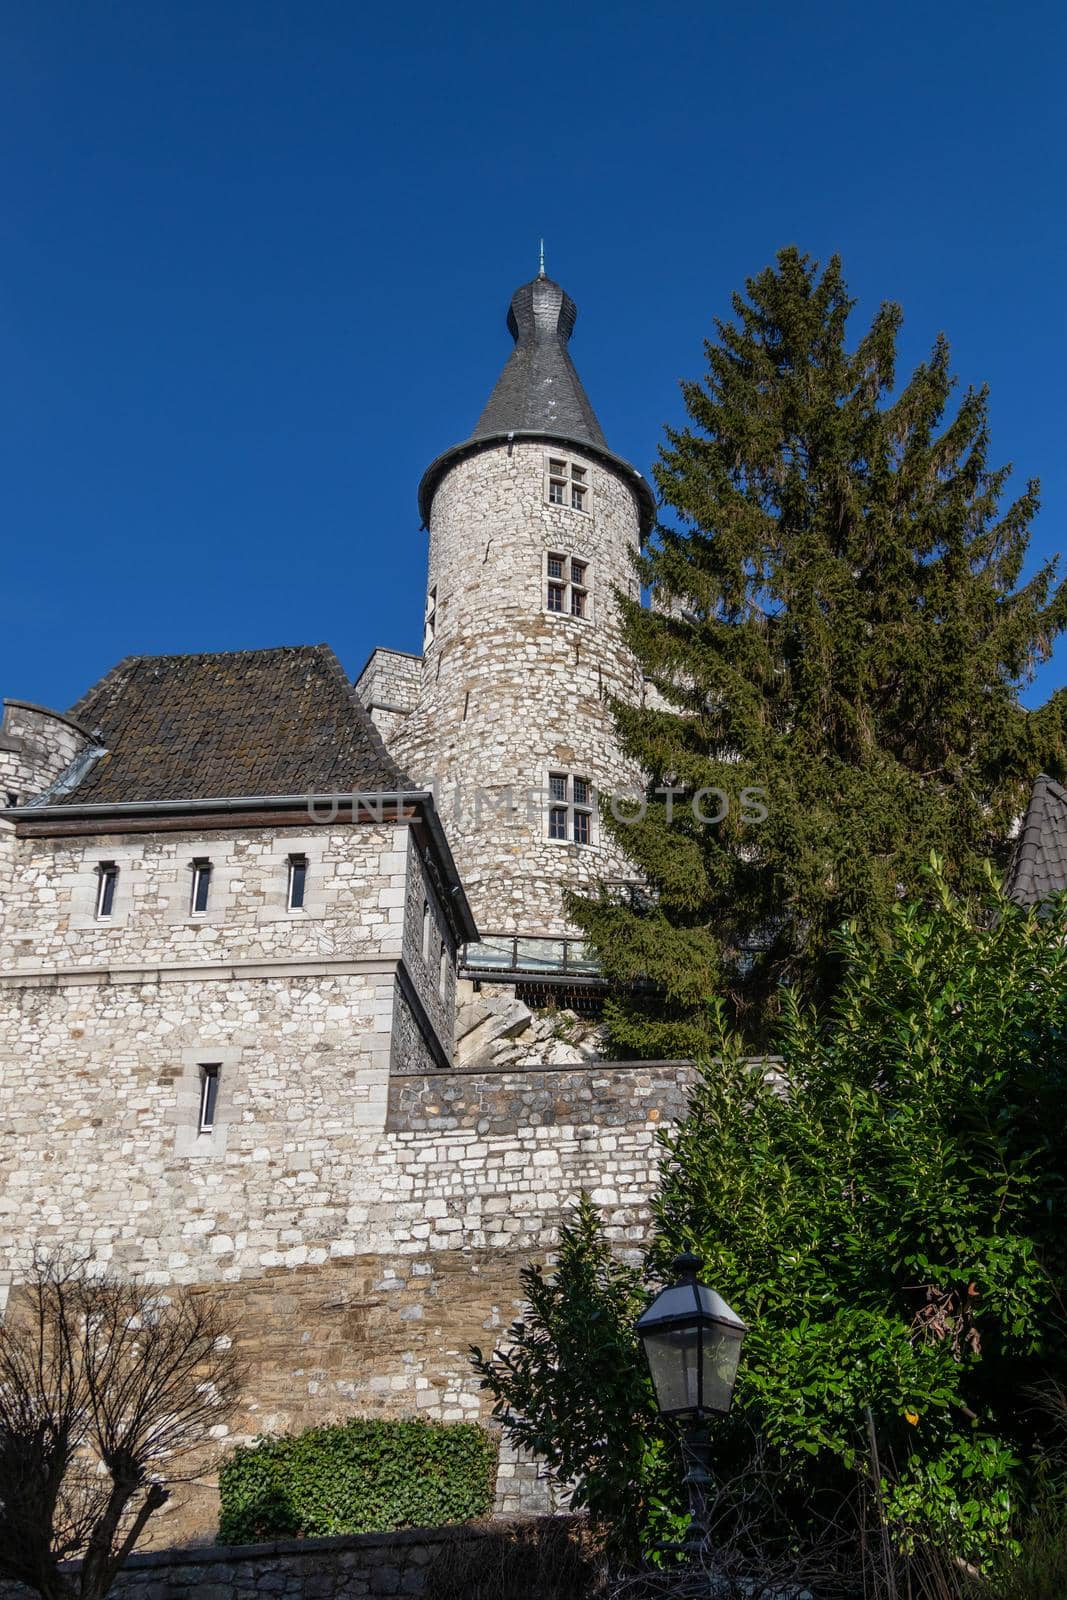 Low angle view at Stolberg castle in Stolberg, Eifel, Germany